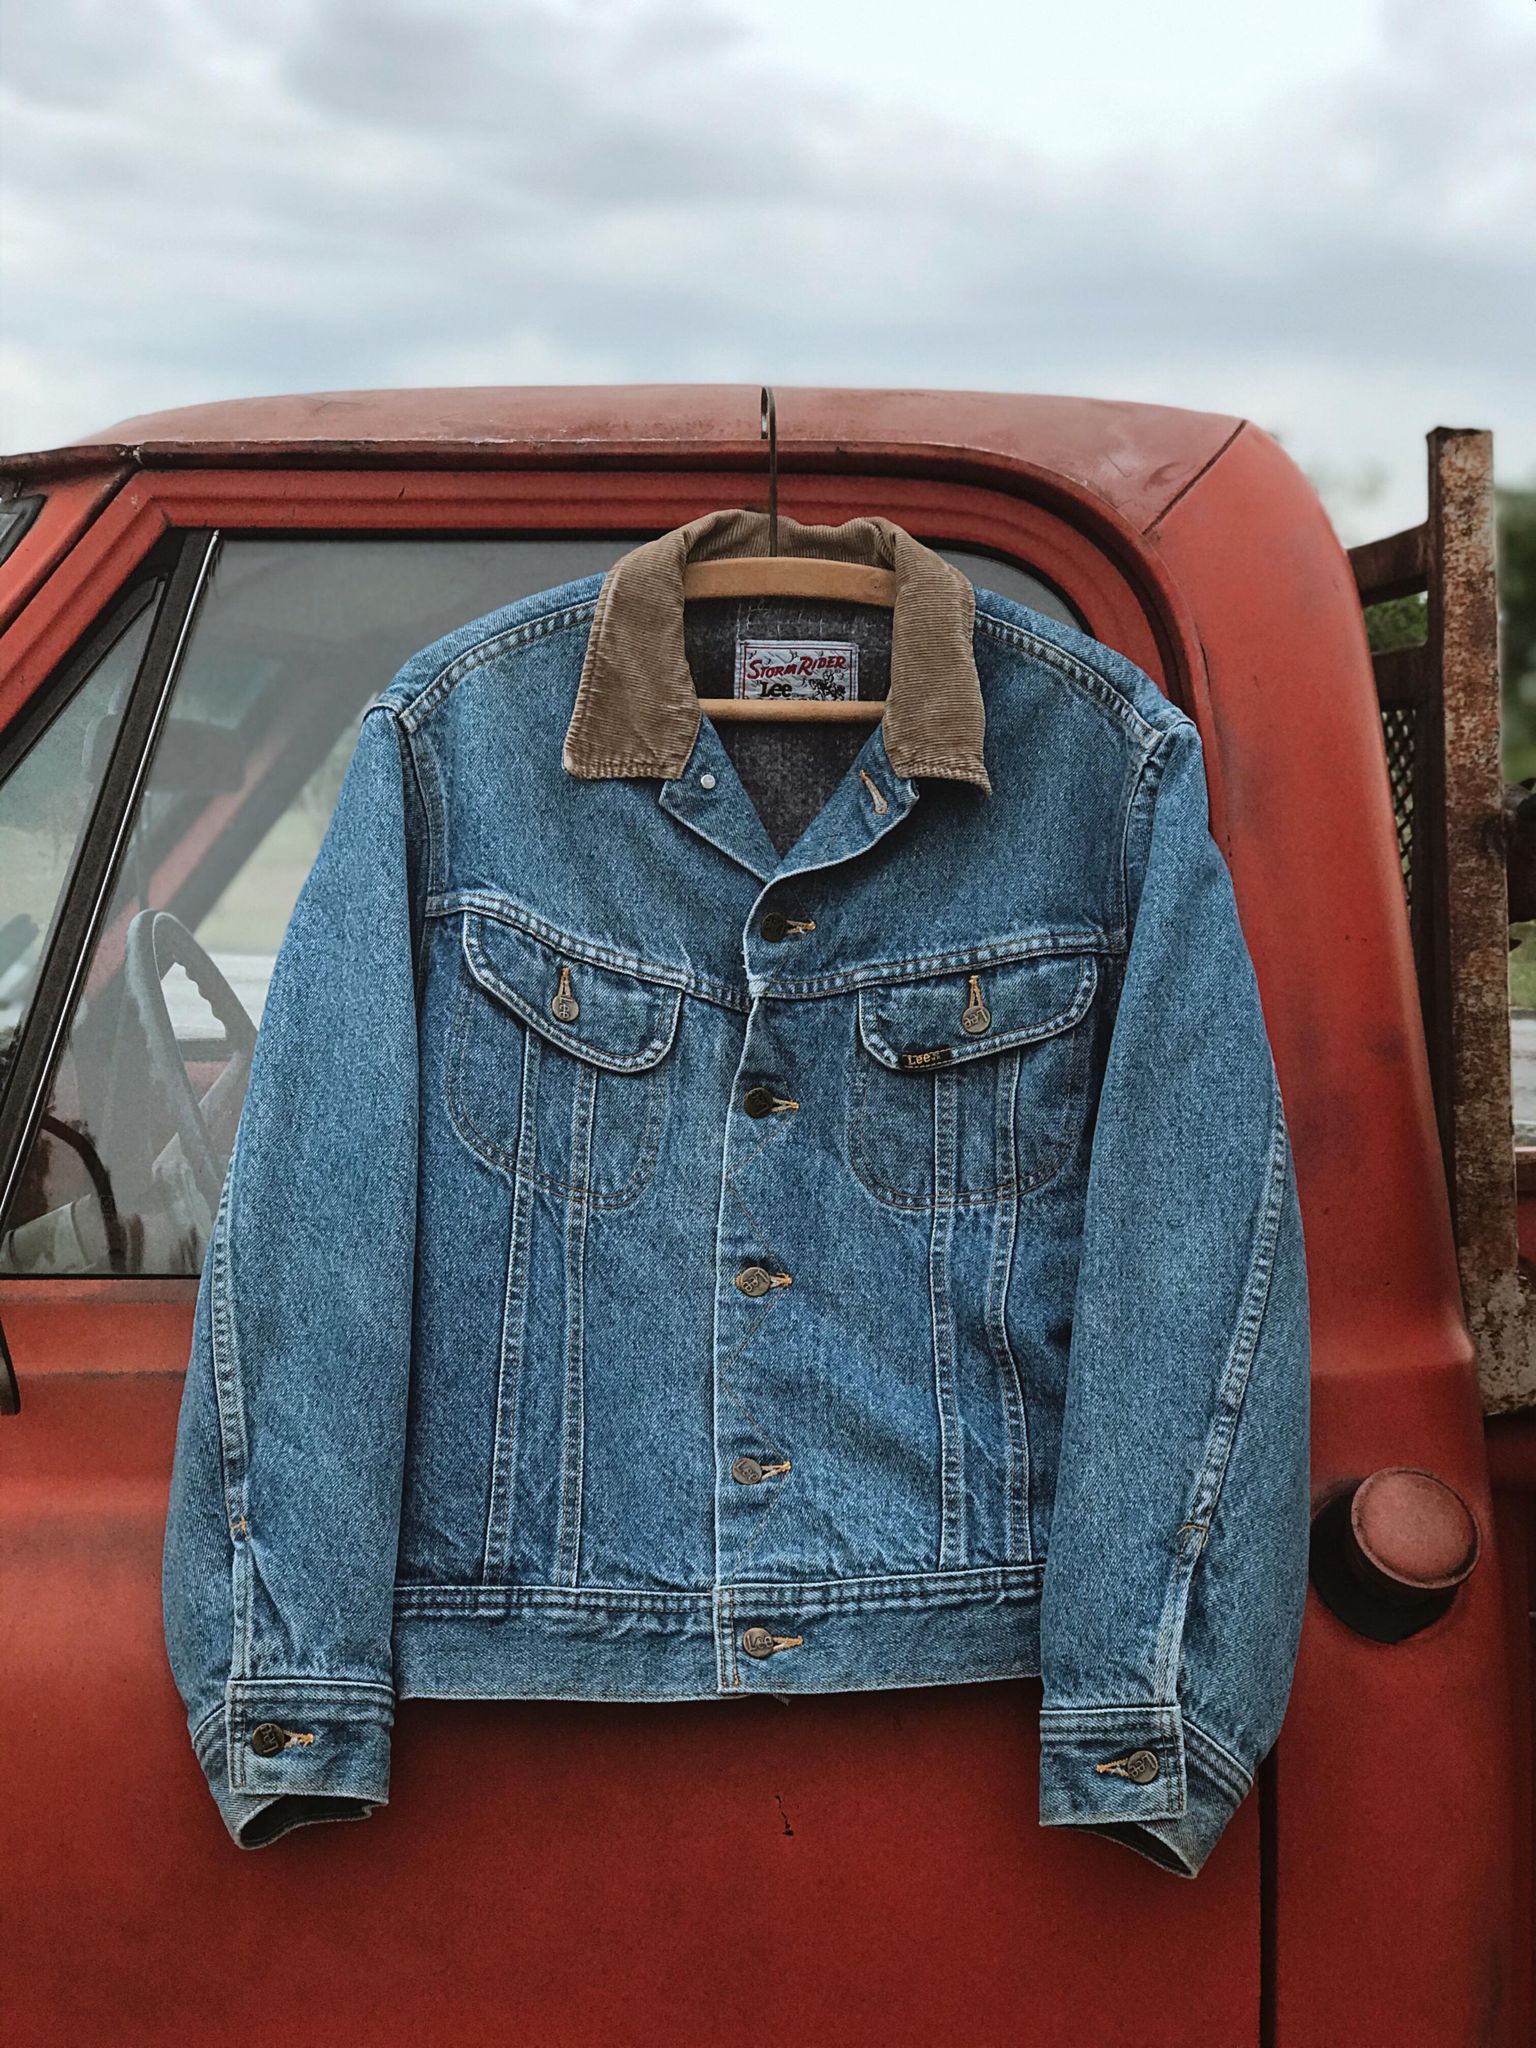 Lee Storm Rider Jacket from the 60's